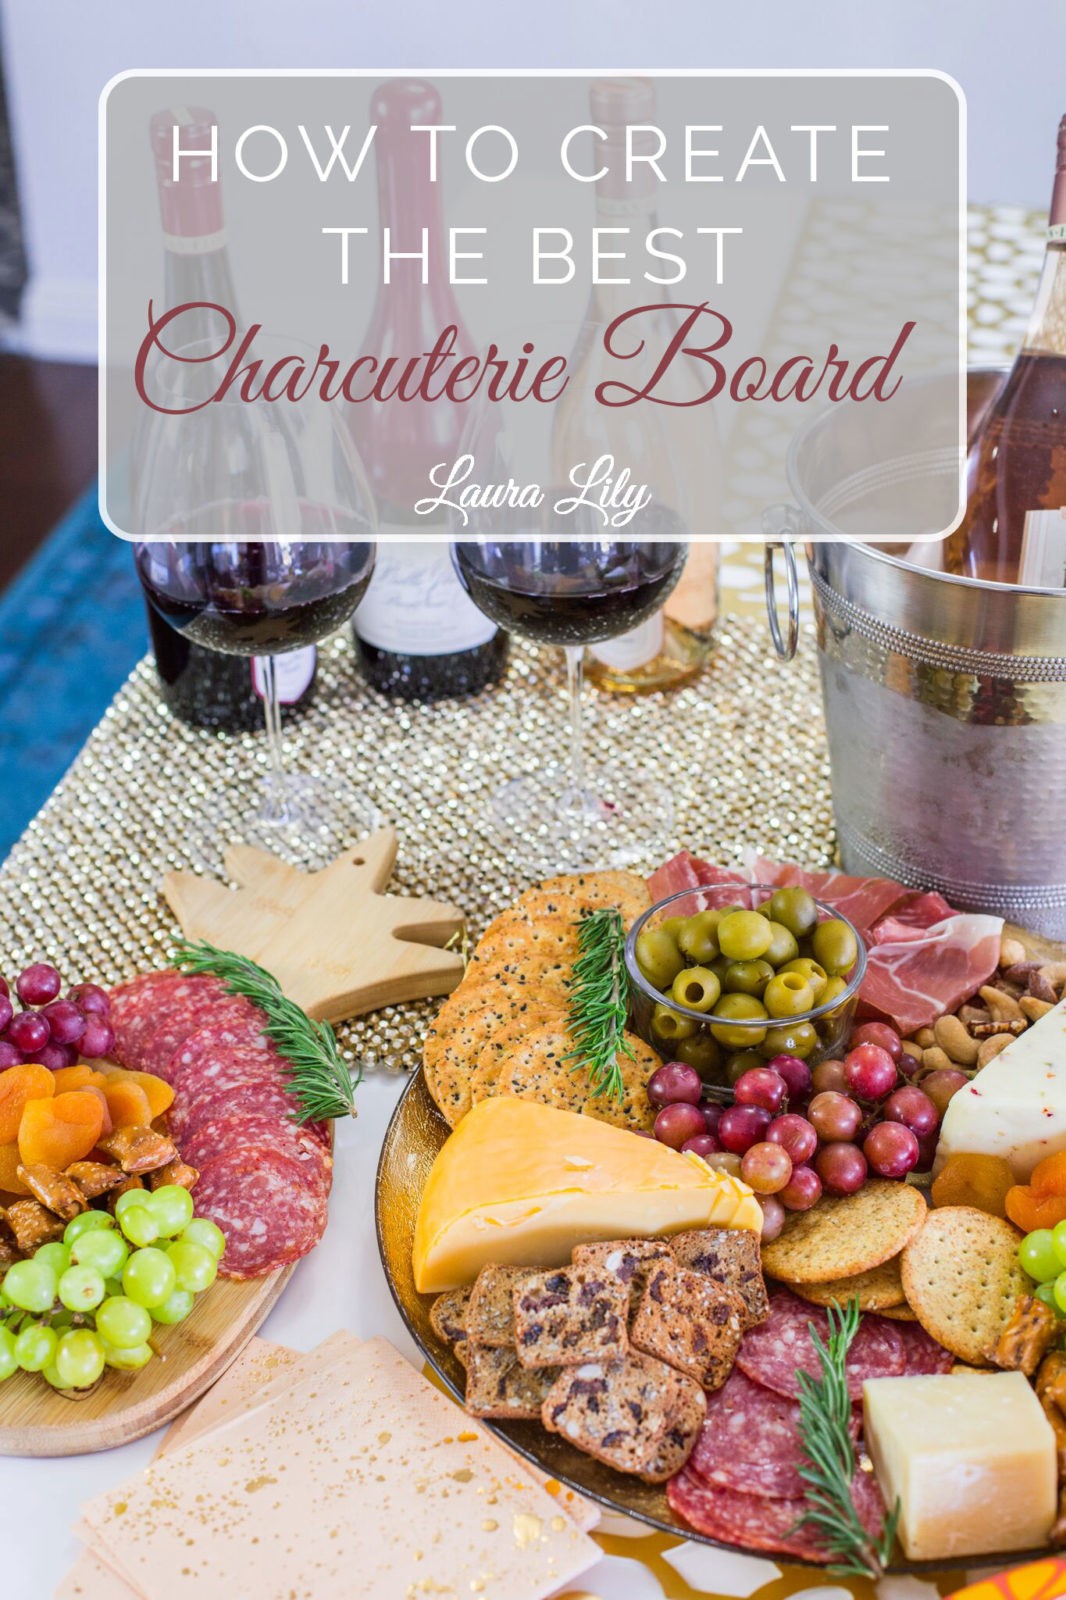 How to Make the åbest charcuterie board by Popular Lifestyle Blogger Laura Lily,